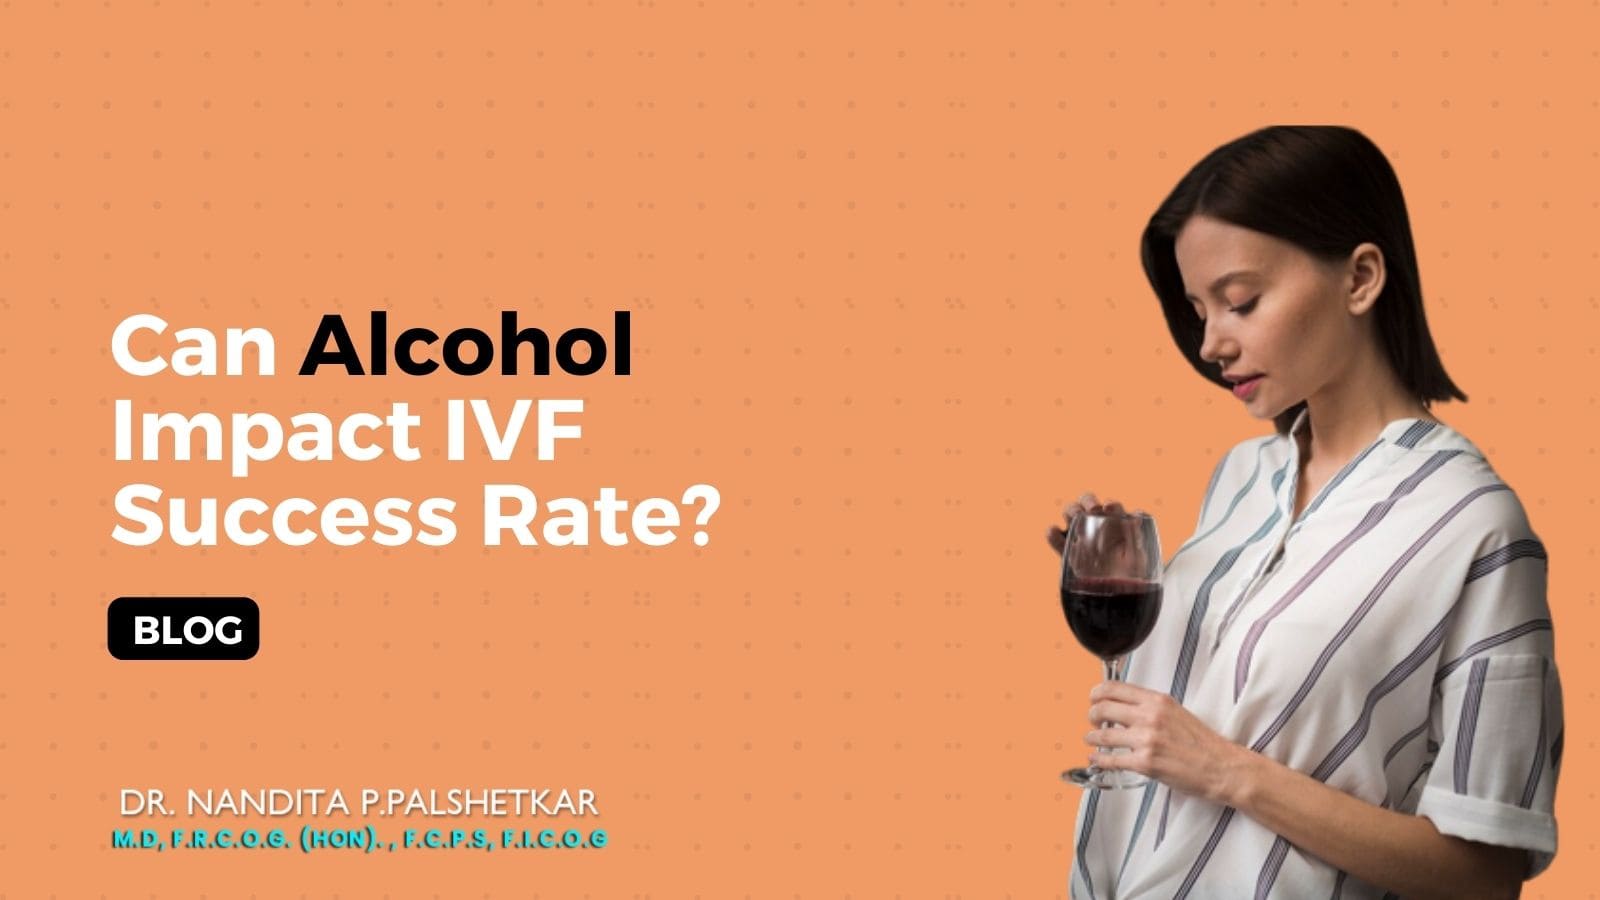 Can Alcohol Impact IVF Success Rate?